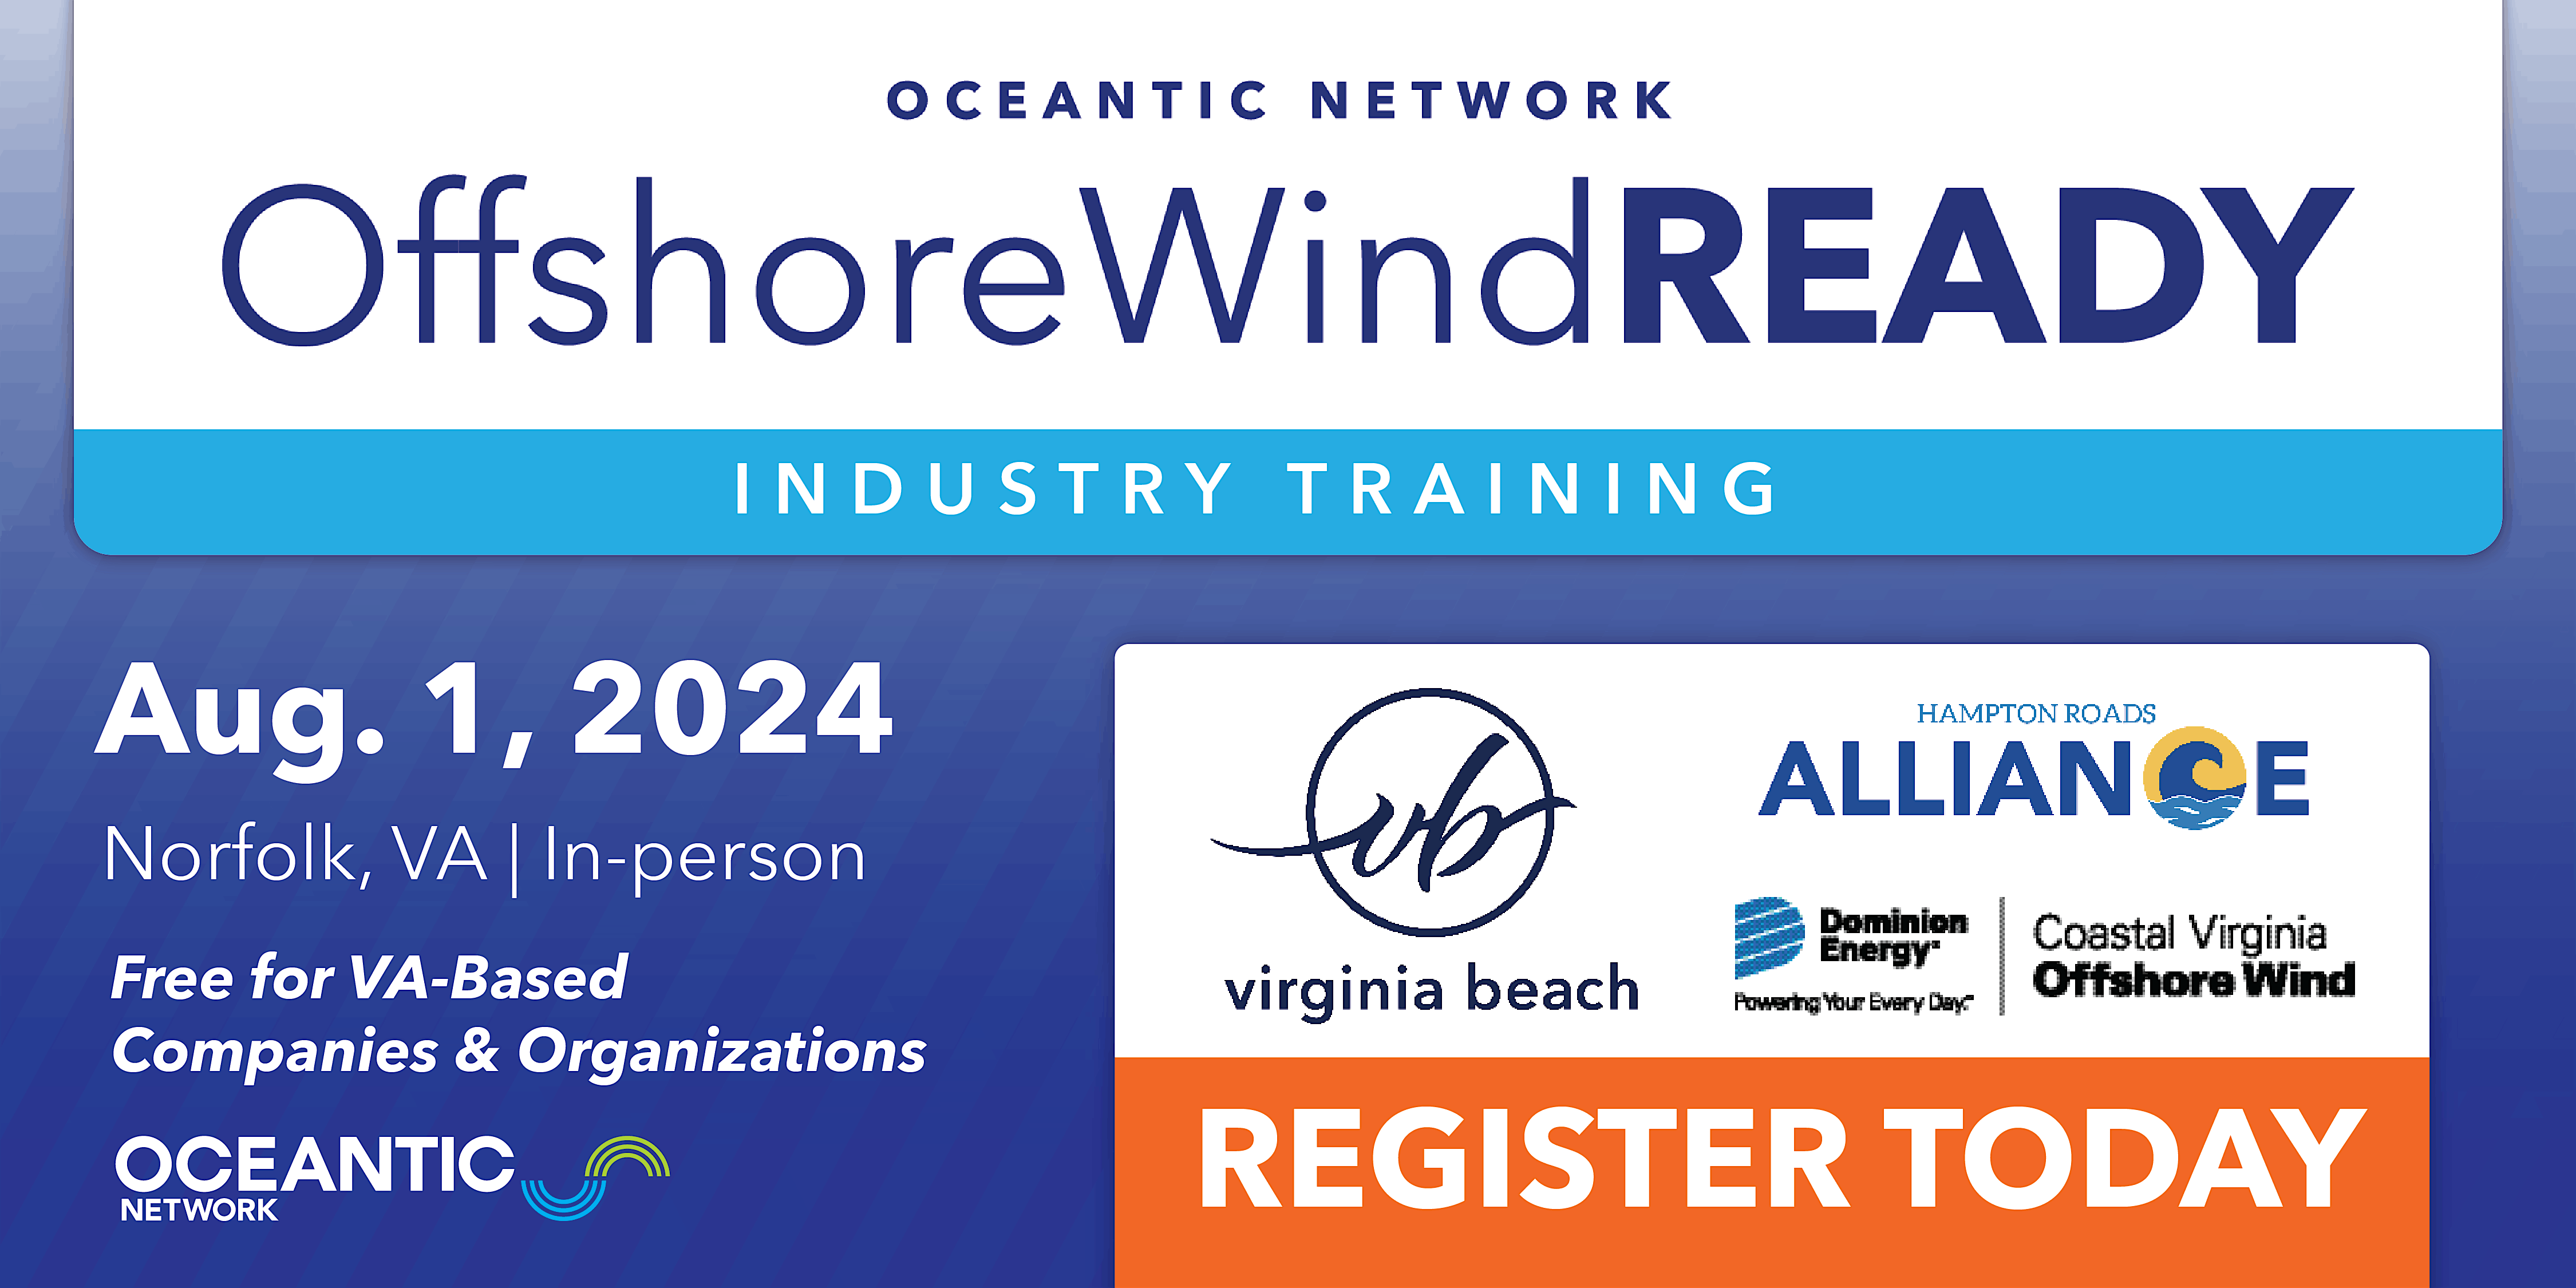 Offshore Wind Ready + Norfolk Harbor Boat Tour (Virginia)